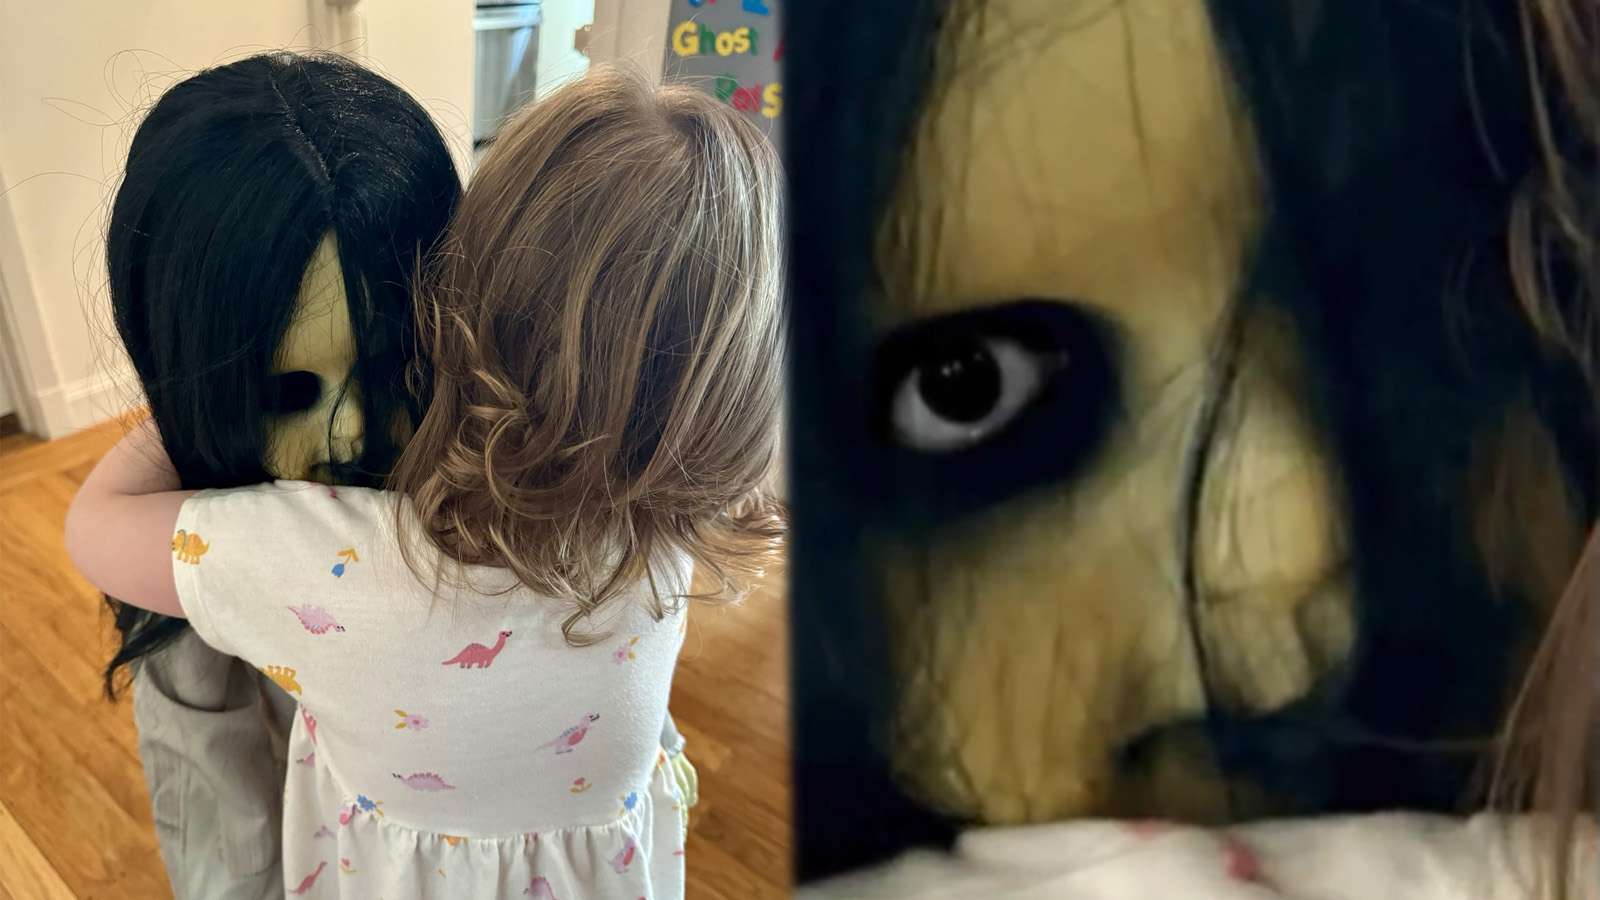 Young girl's friendship with creepy doll has internet terrified